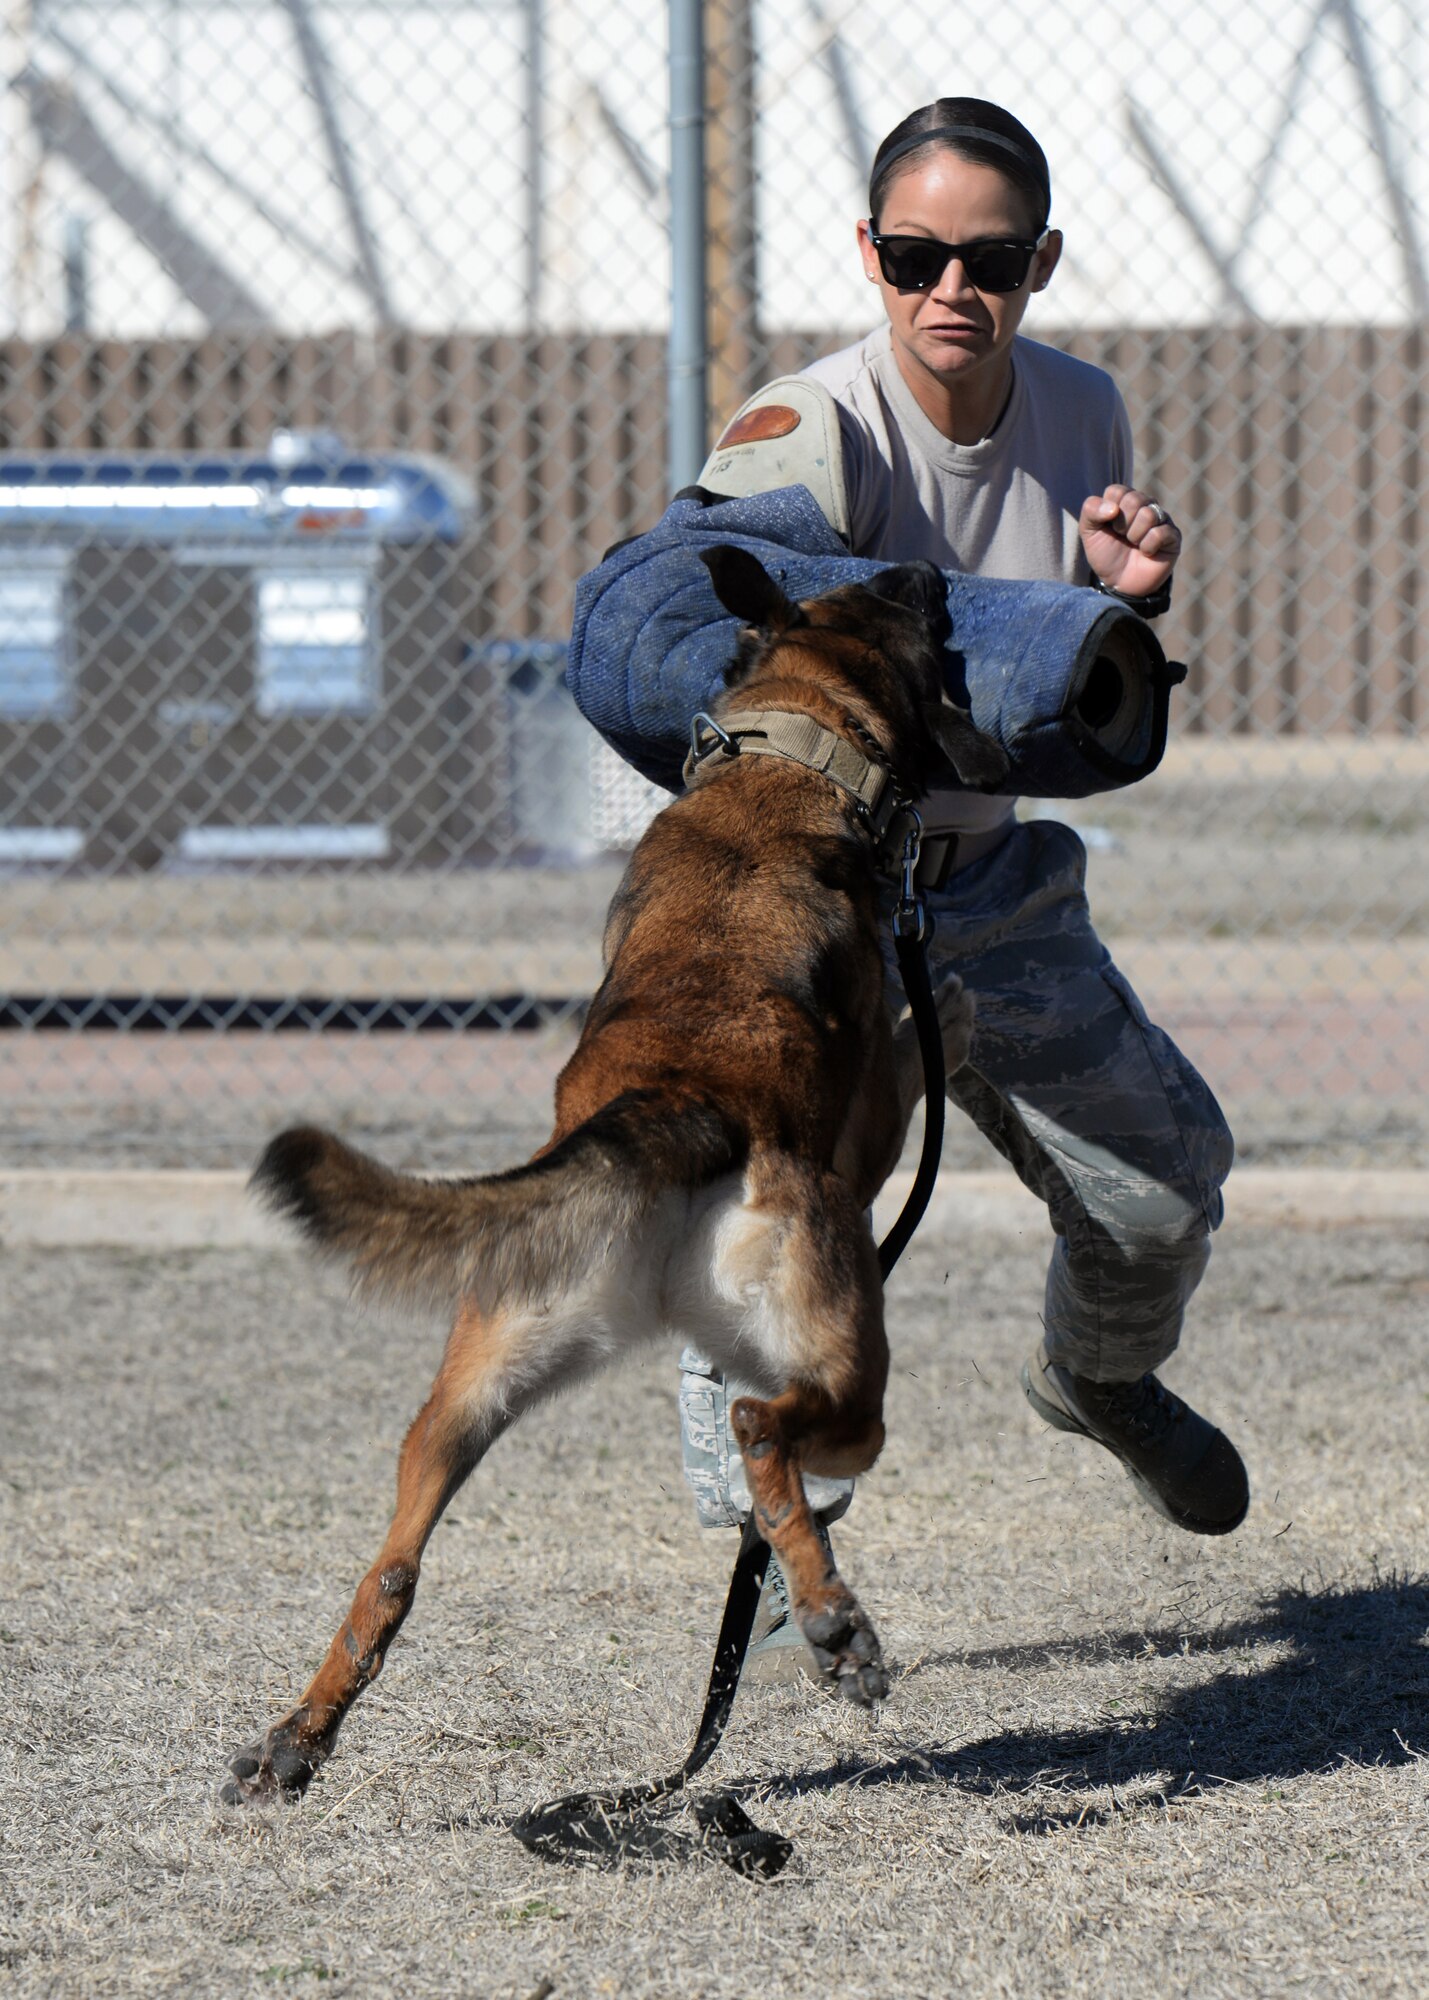 Yyoda, a U.S. Air Force military working dod, bites U.S. Air Force Senior Airmen Laci Mendez, 97th Security Forces Squadron working dog handler, during bite training at the kennels, Feb. 10, 2015. Military working dogs are trained to bite and hold, releasing only when their handler gives the command. (U.S. Air Force photo by Airman 1st Class Megan E. Acs)